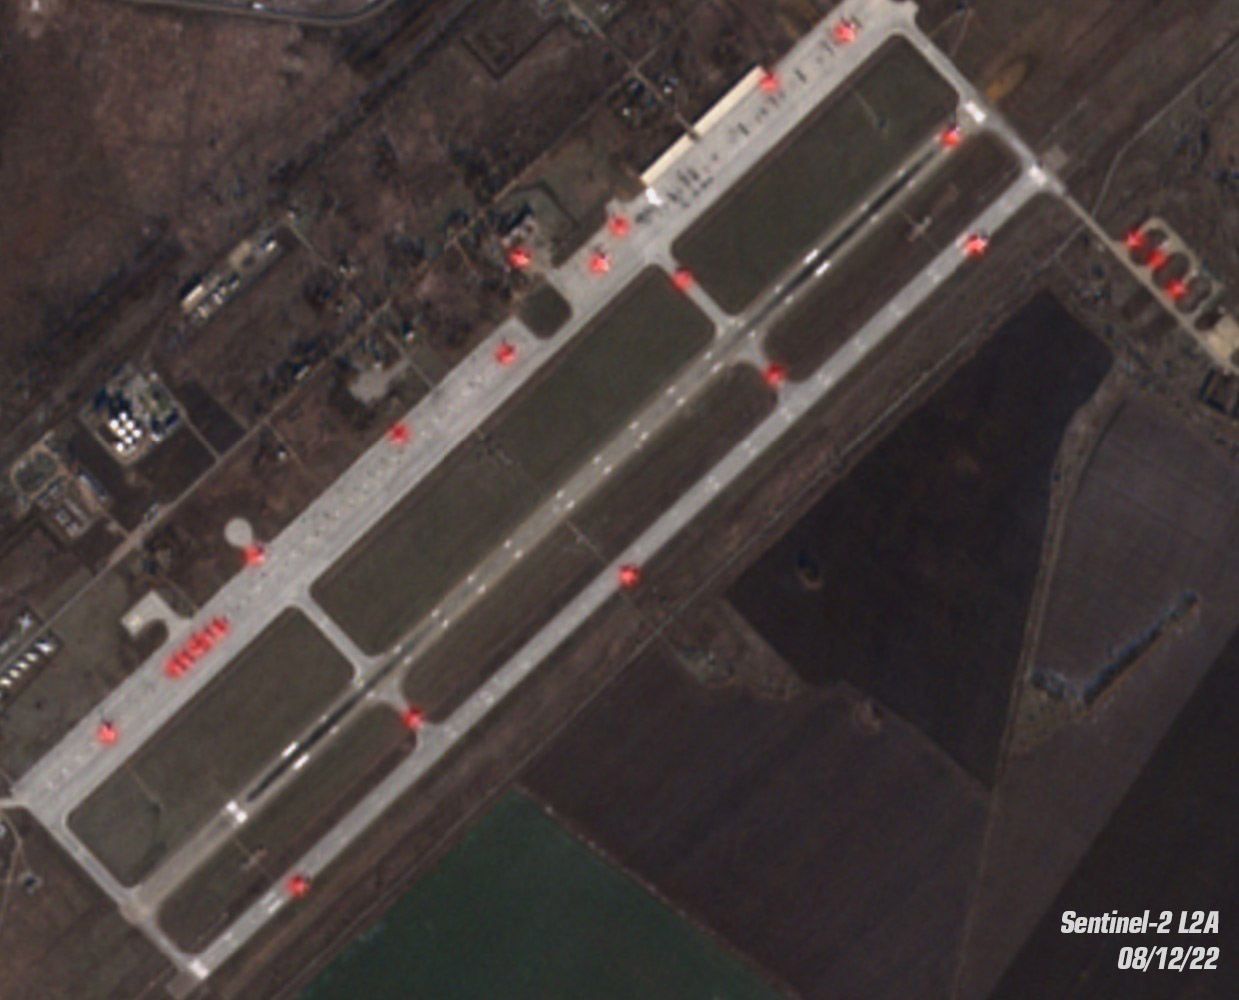 Satellite image of the Engels air base from December 8, with all aircraft highlighted